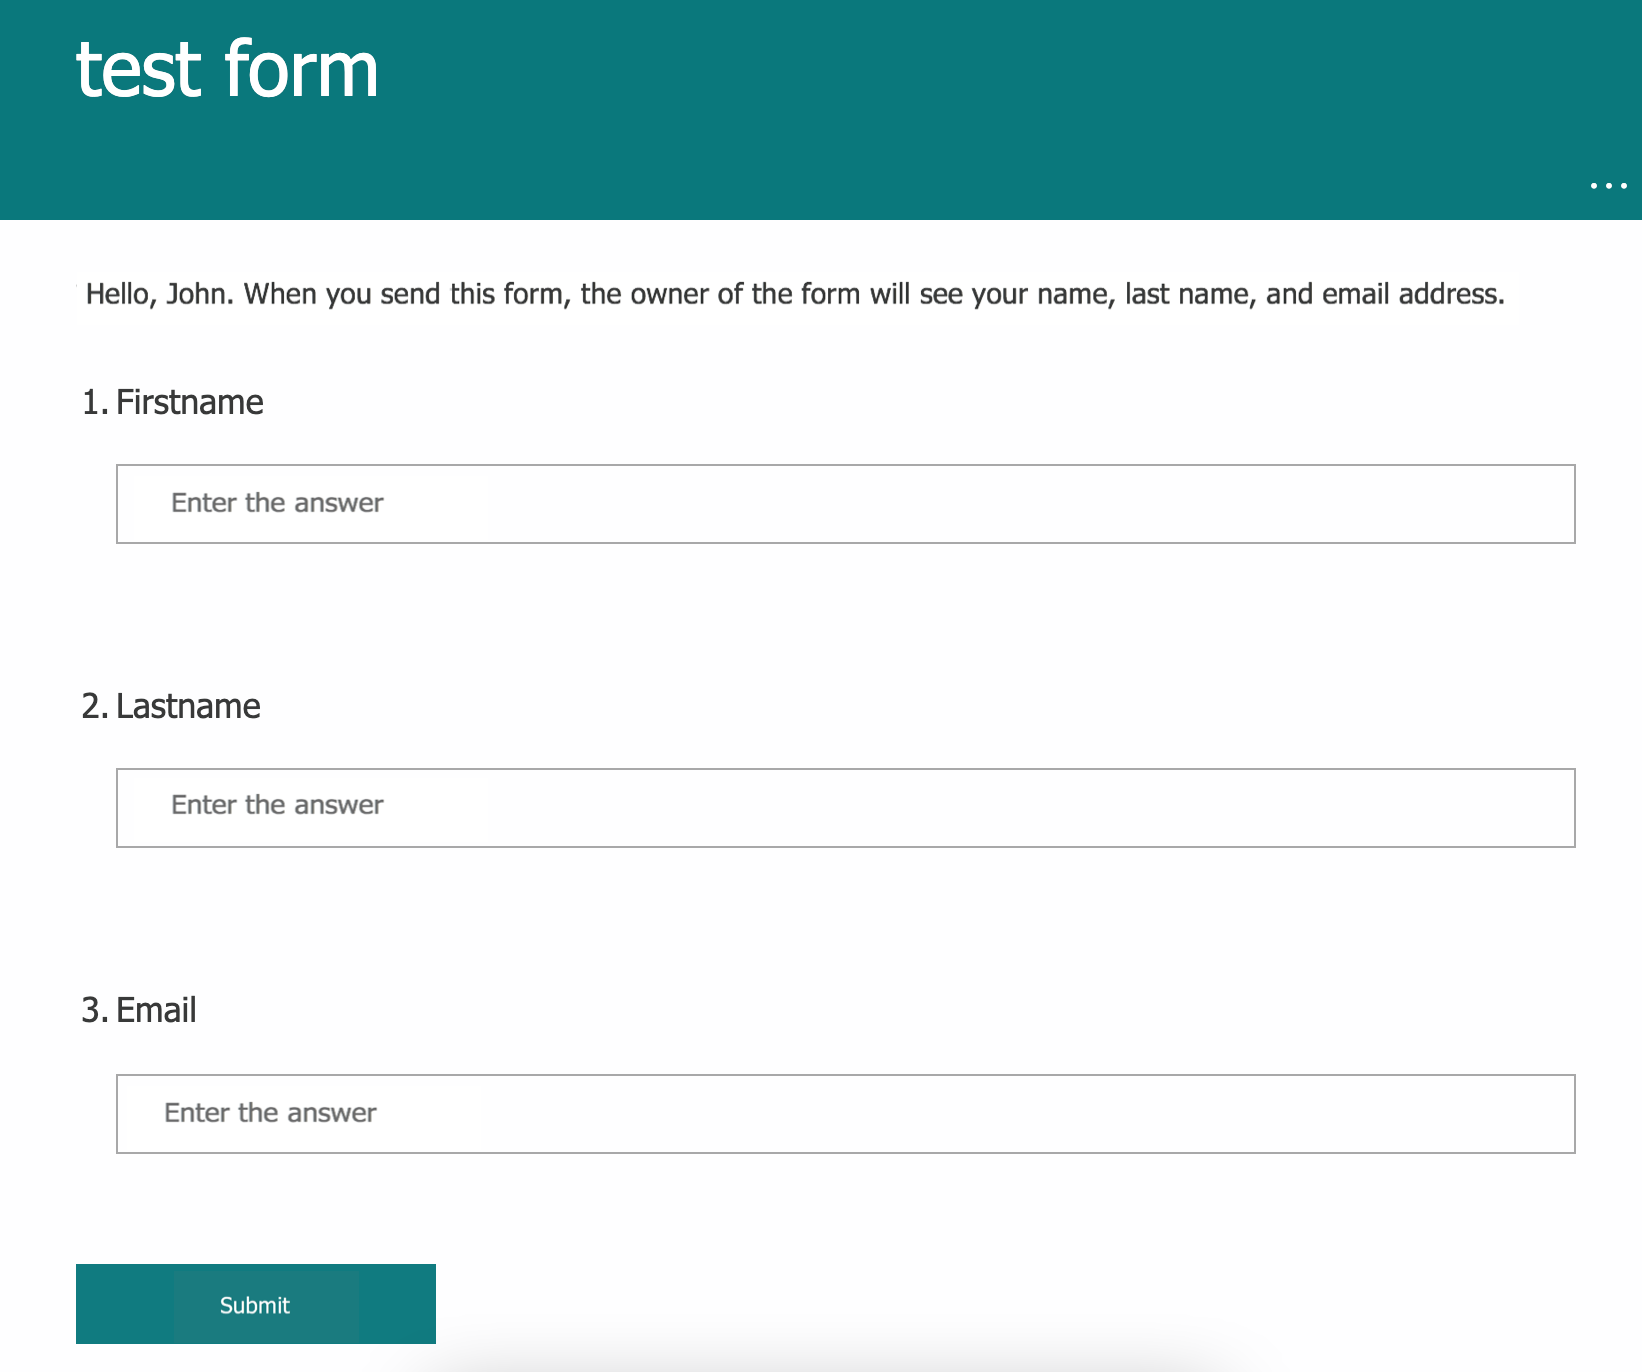 Example form used in this use case